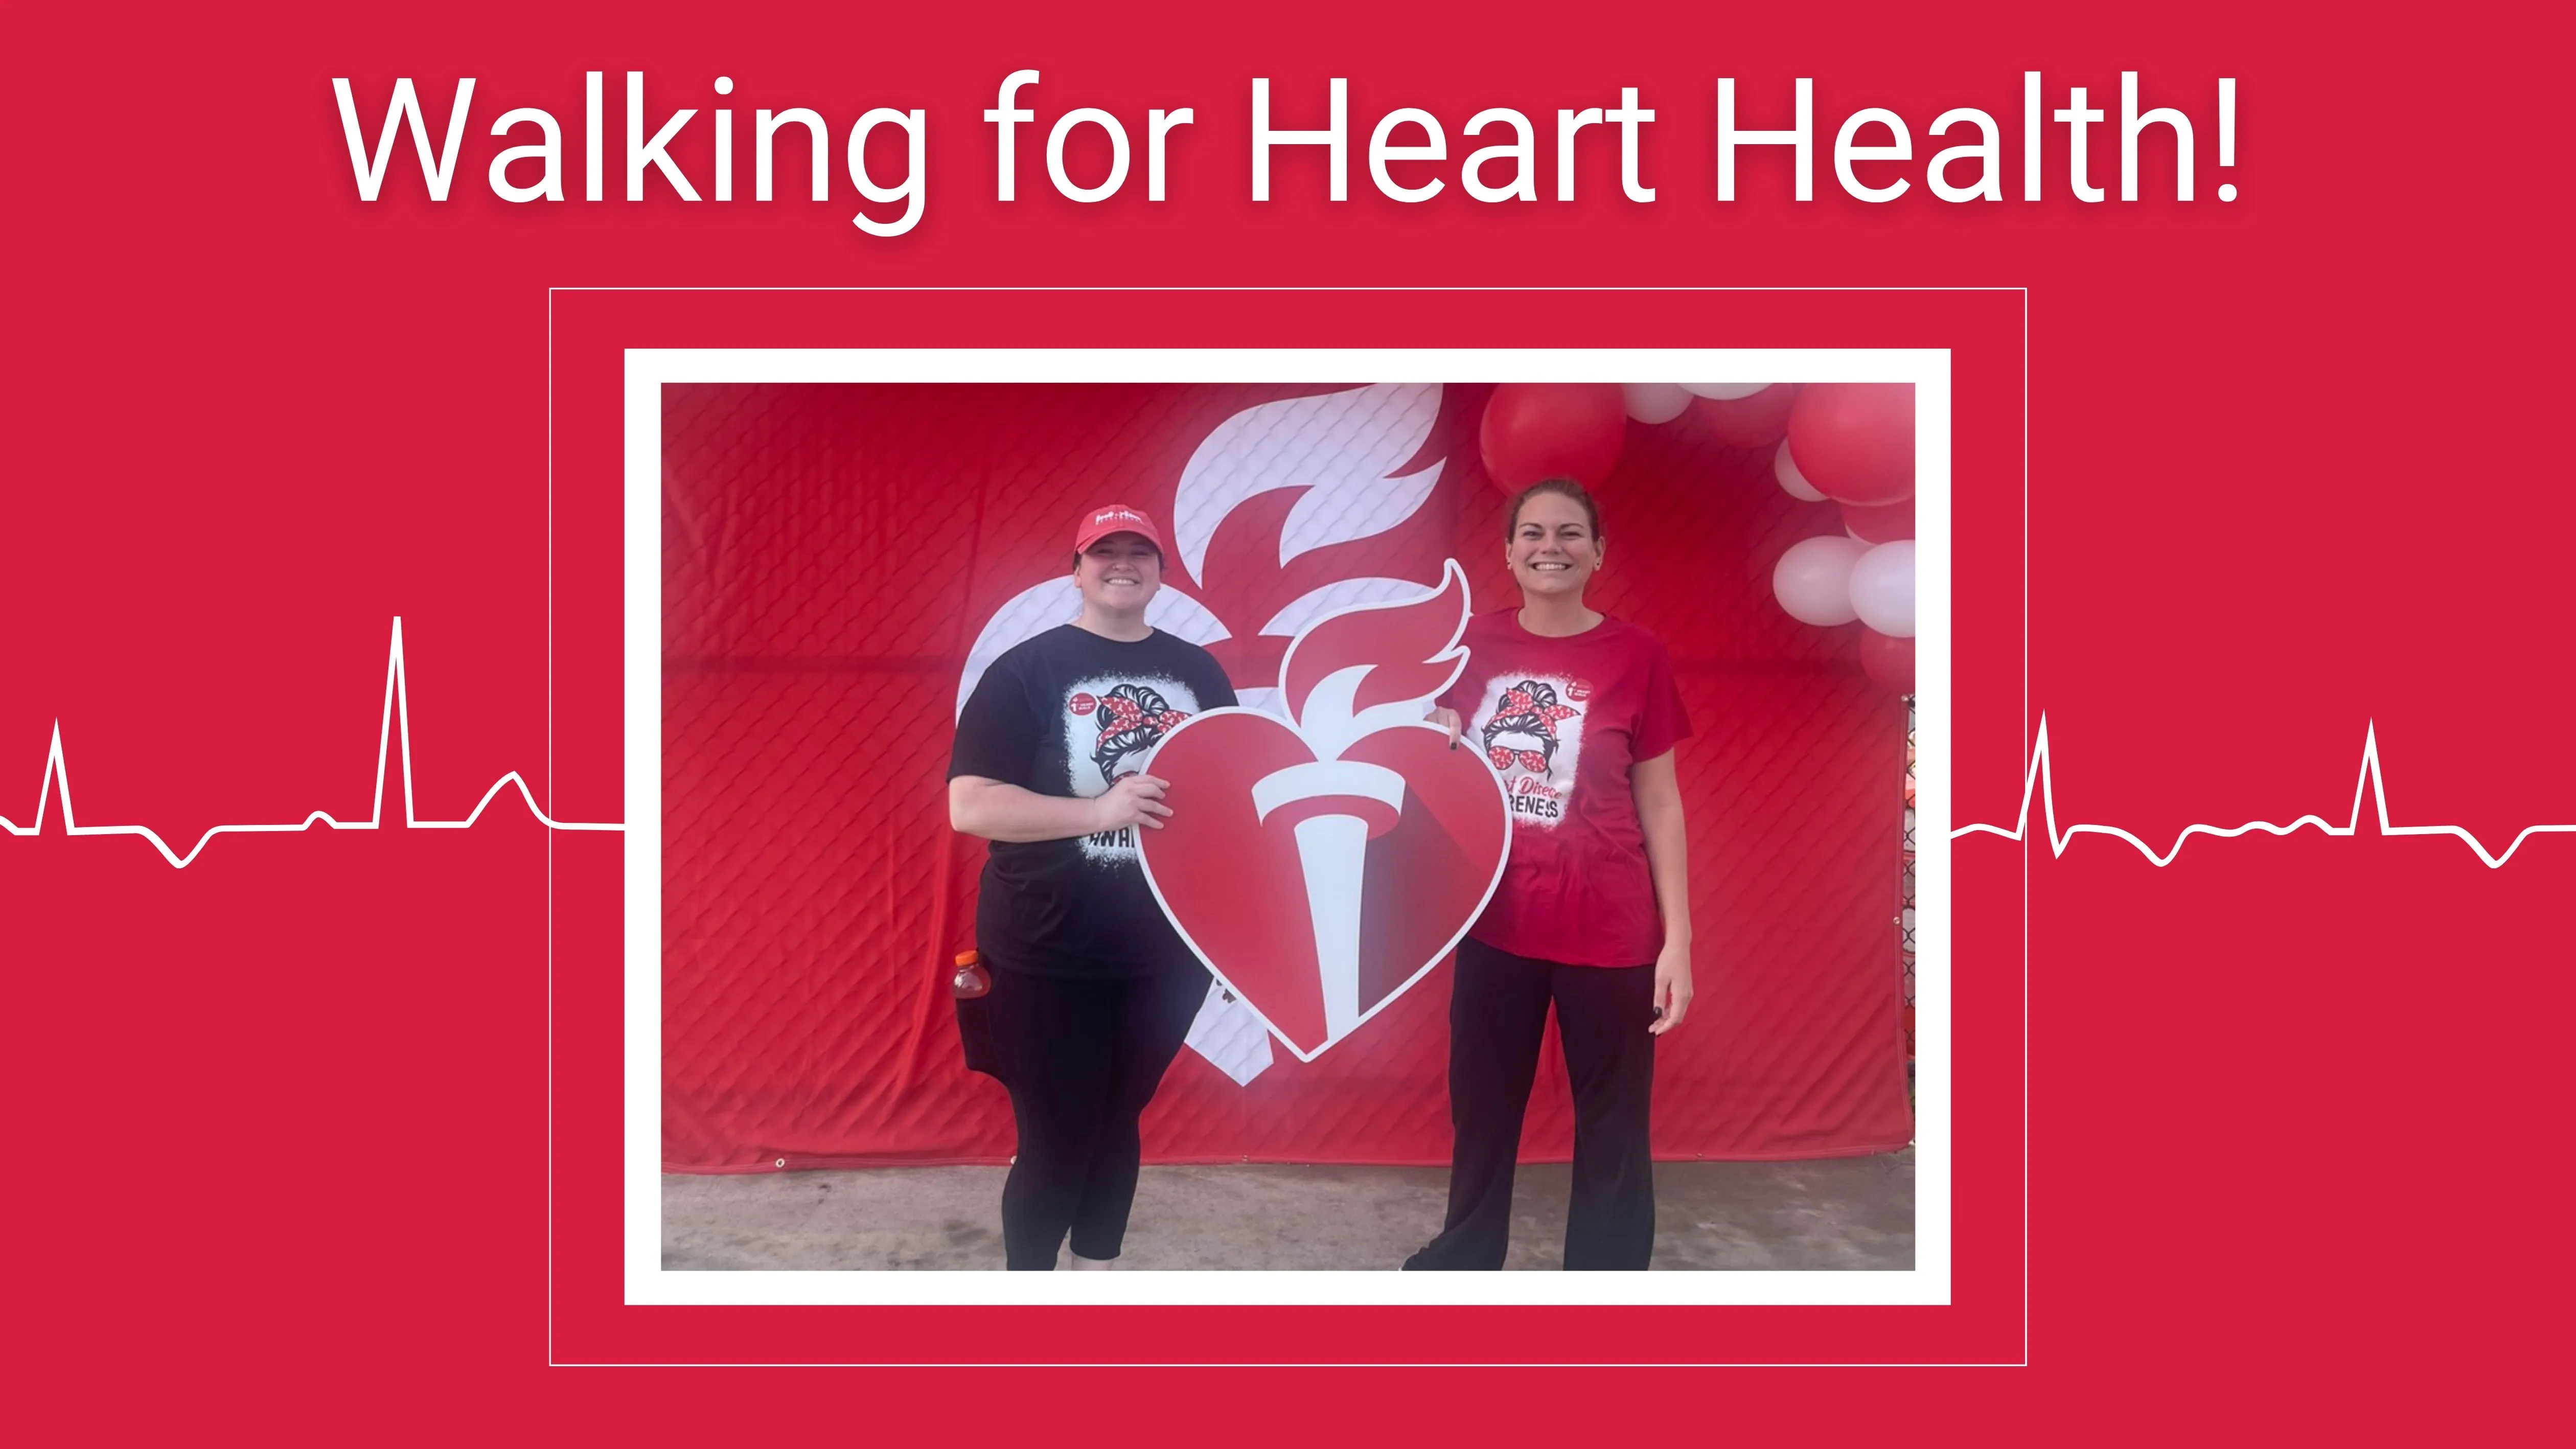 Two Interim HealthCare of the Midlands nurses stand together smiling and holding the American Heart Association symbol.